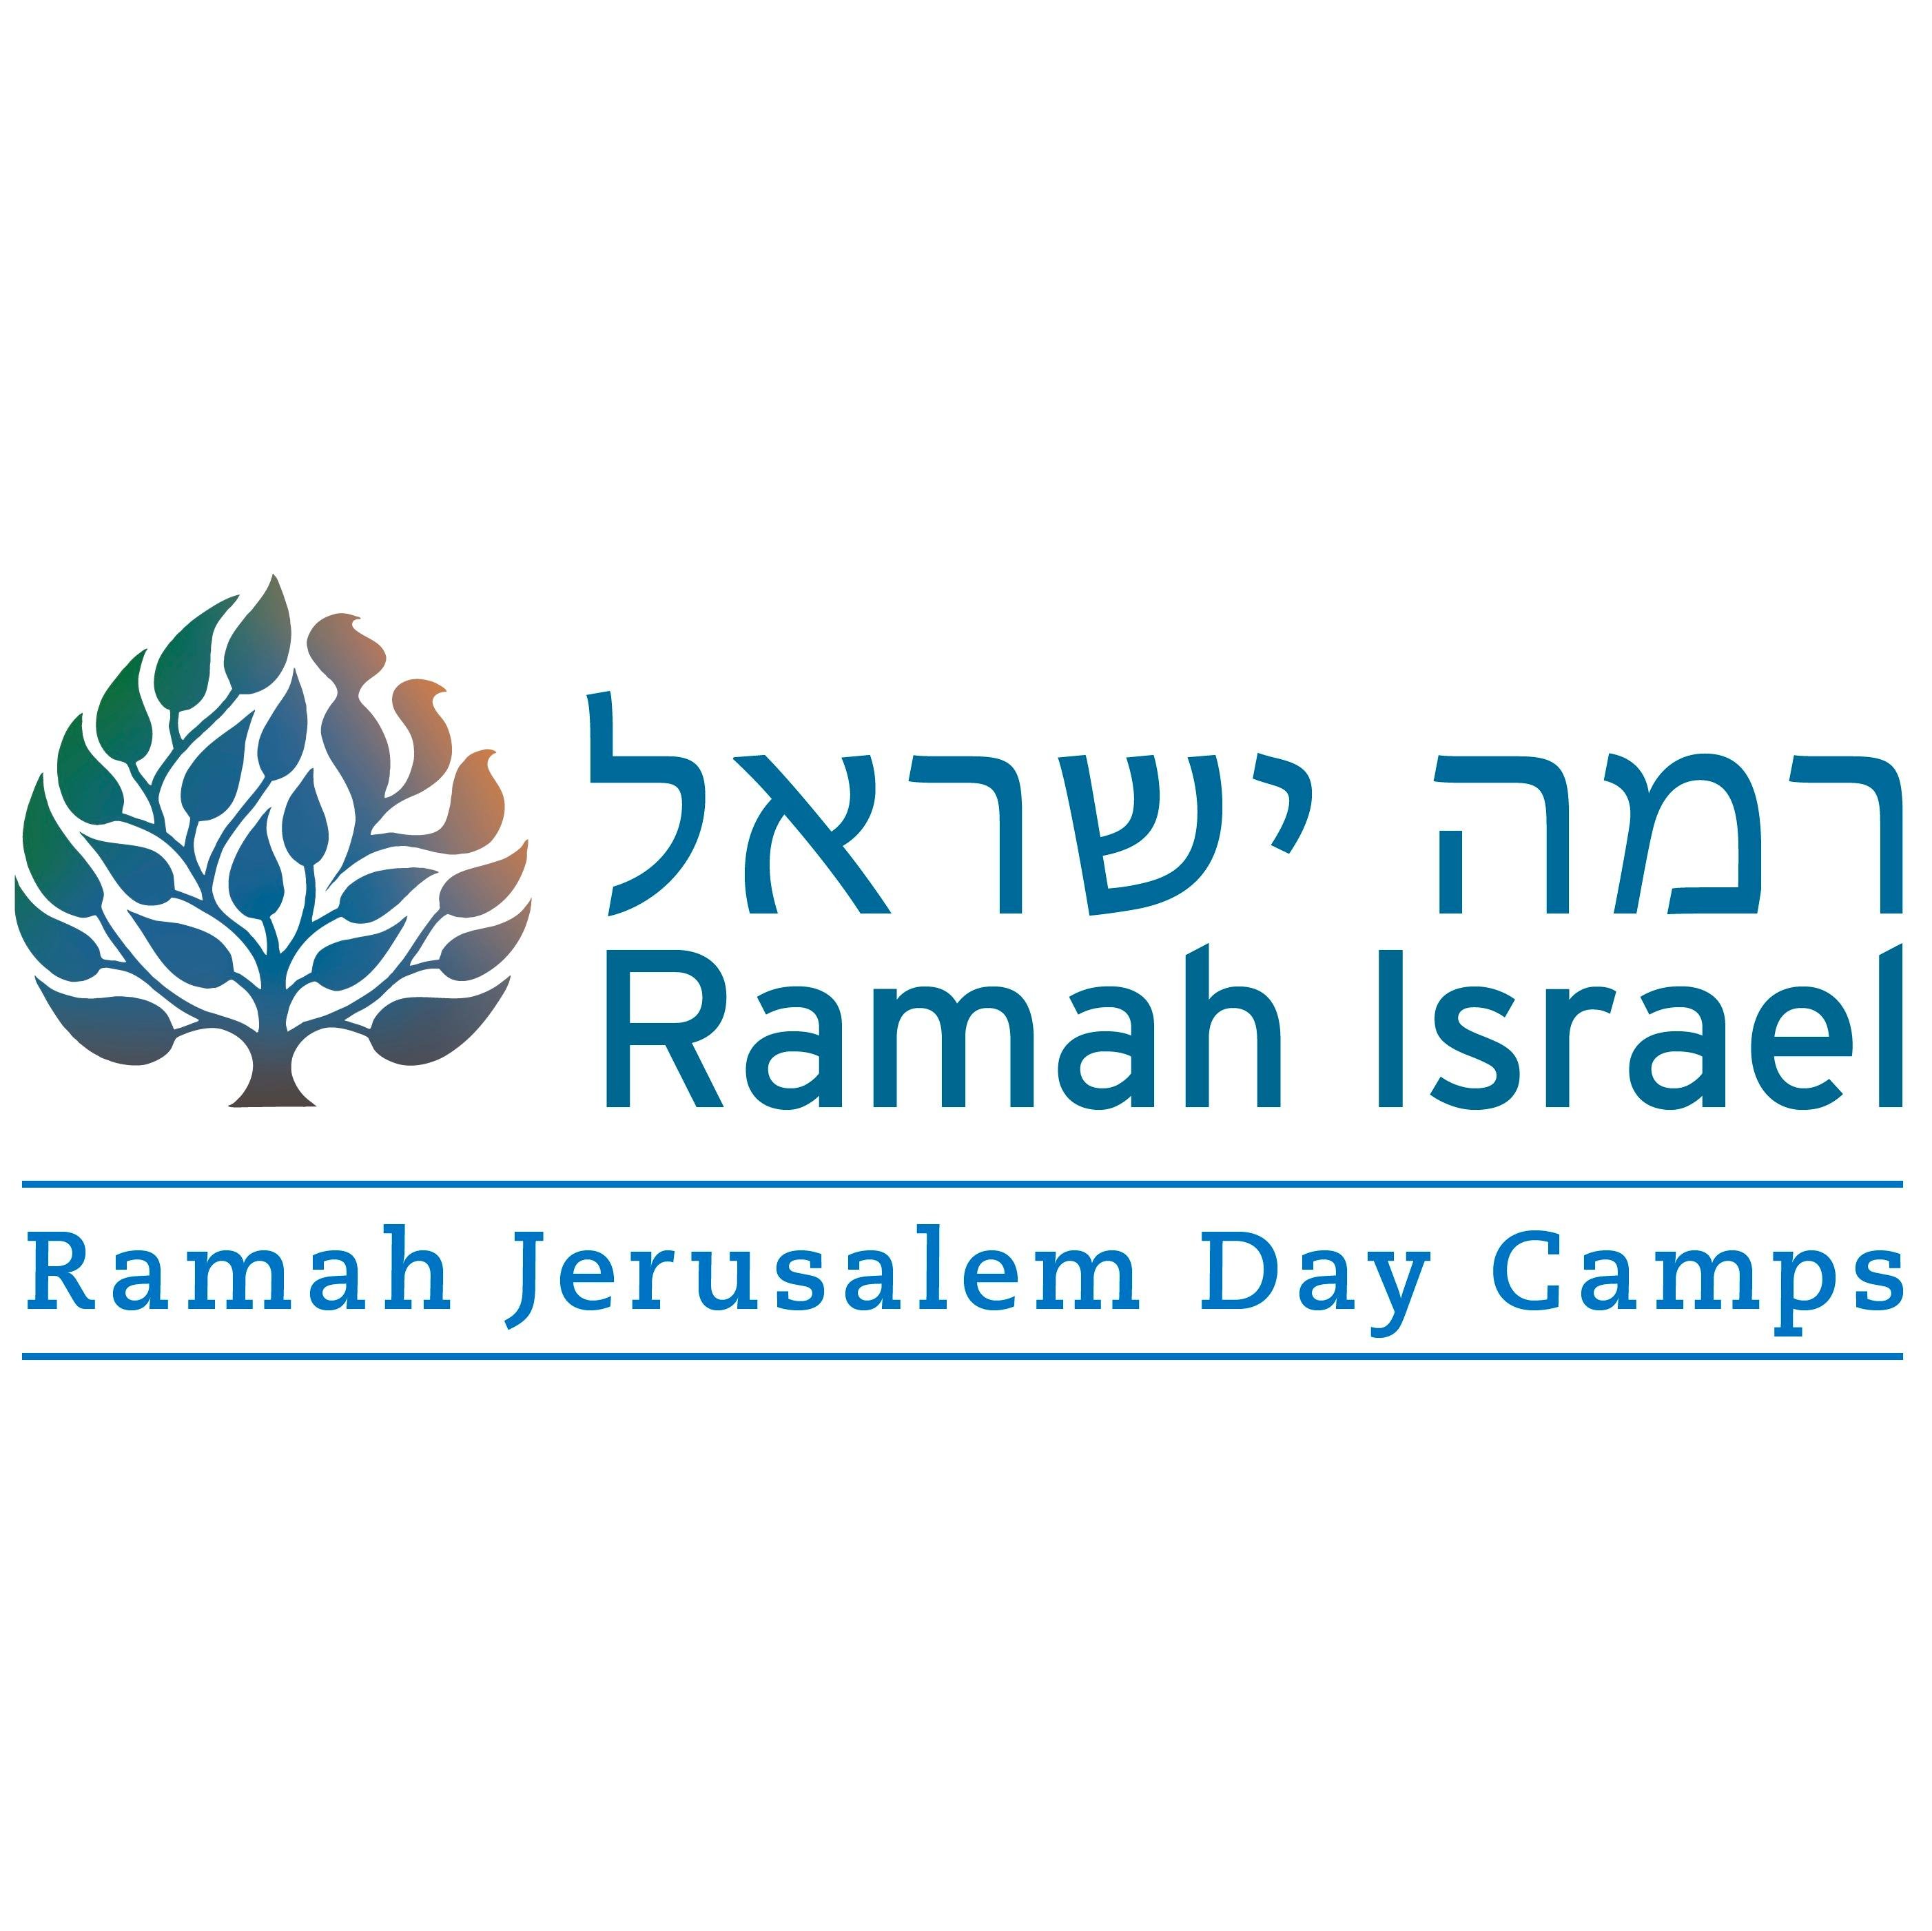 Ramah Jerusalem Day Camp is an outstanding Israel summer experience for English-speaking children entering grades K-8.